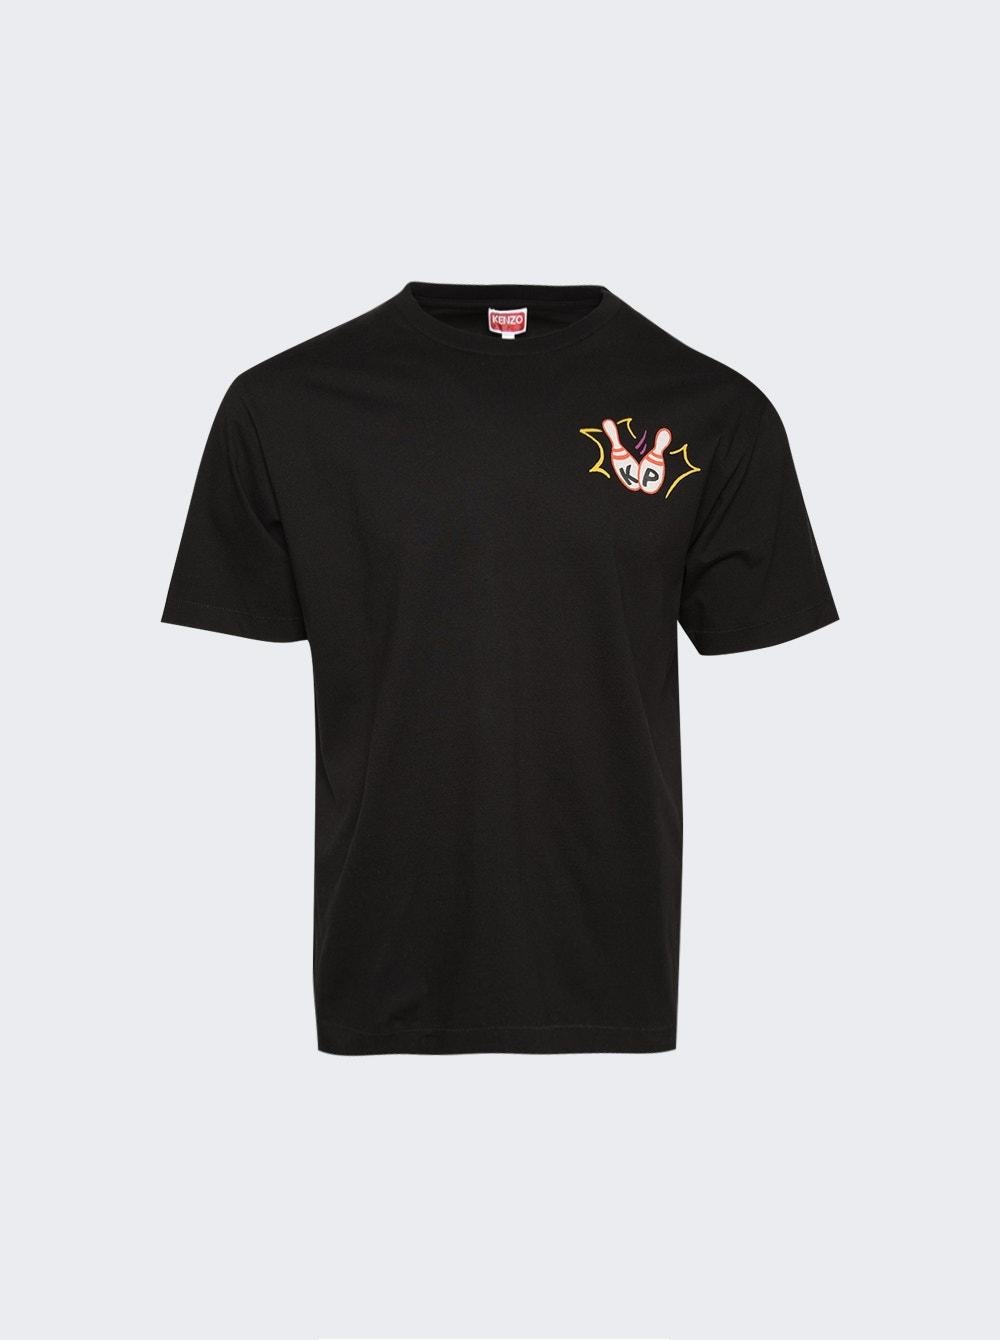 Oversized Bowling Team Tee Black by KENZO